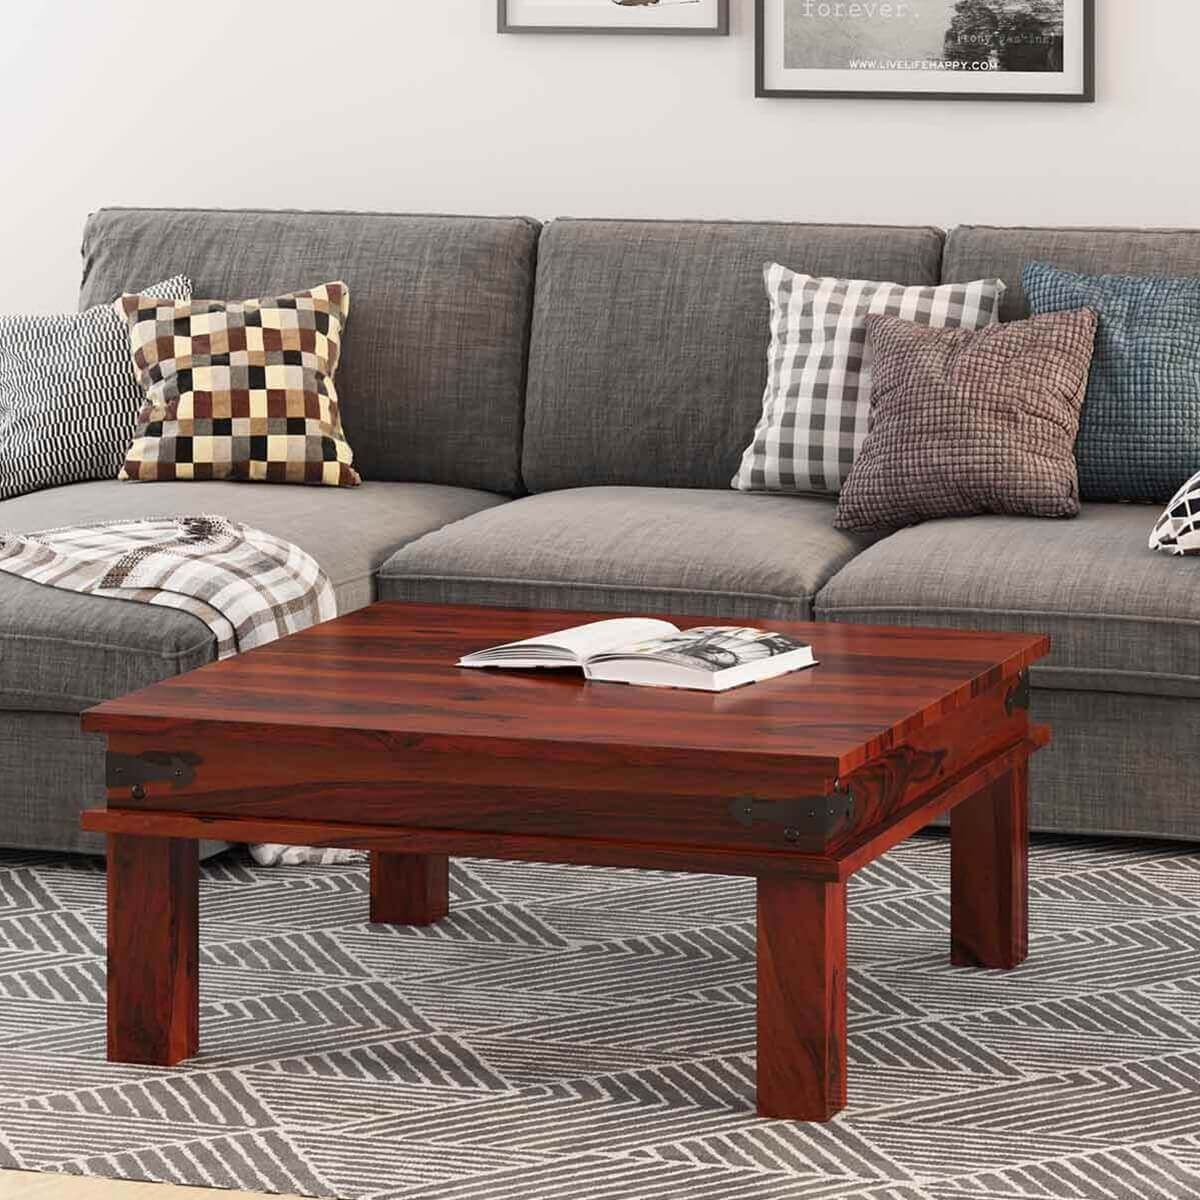 Altamont Transitional Solid Wood Square Coffee Table Throughout Transitional Square Coffee Tables (Gallery 1 of 20)